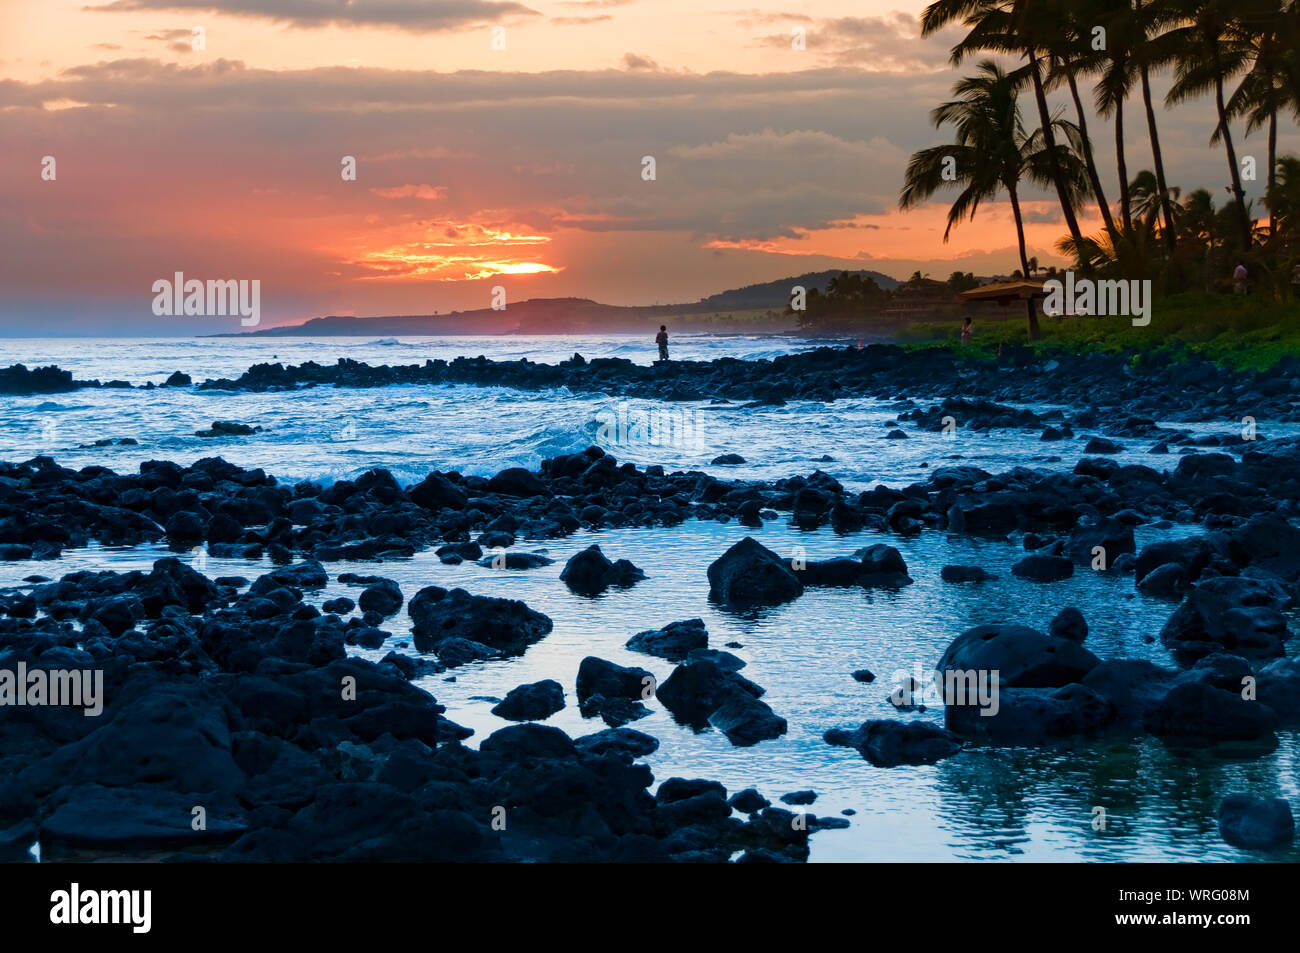 Palm trees silhouetted against a colorful tropical sunset and reflected in the Pacific Ocean on the island of Kauai, Hawaii, USA Stock Photo